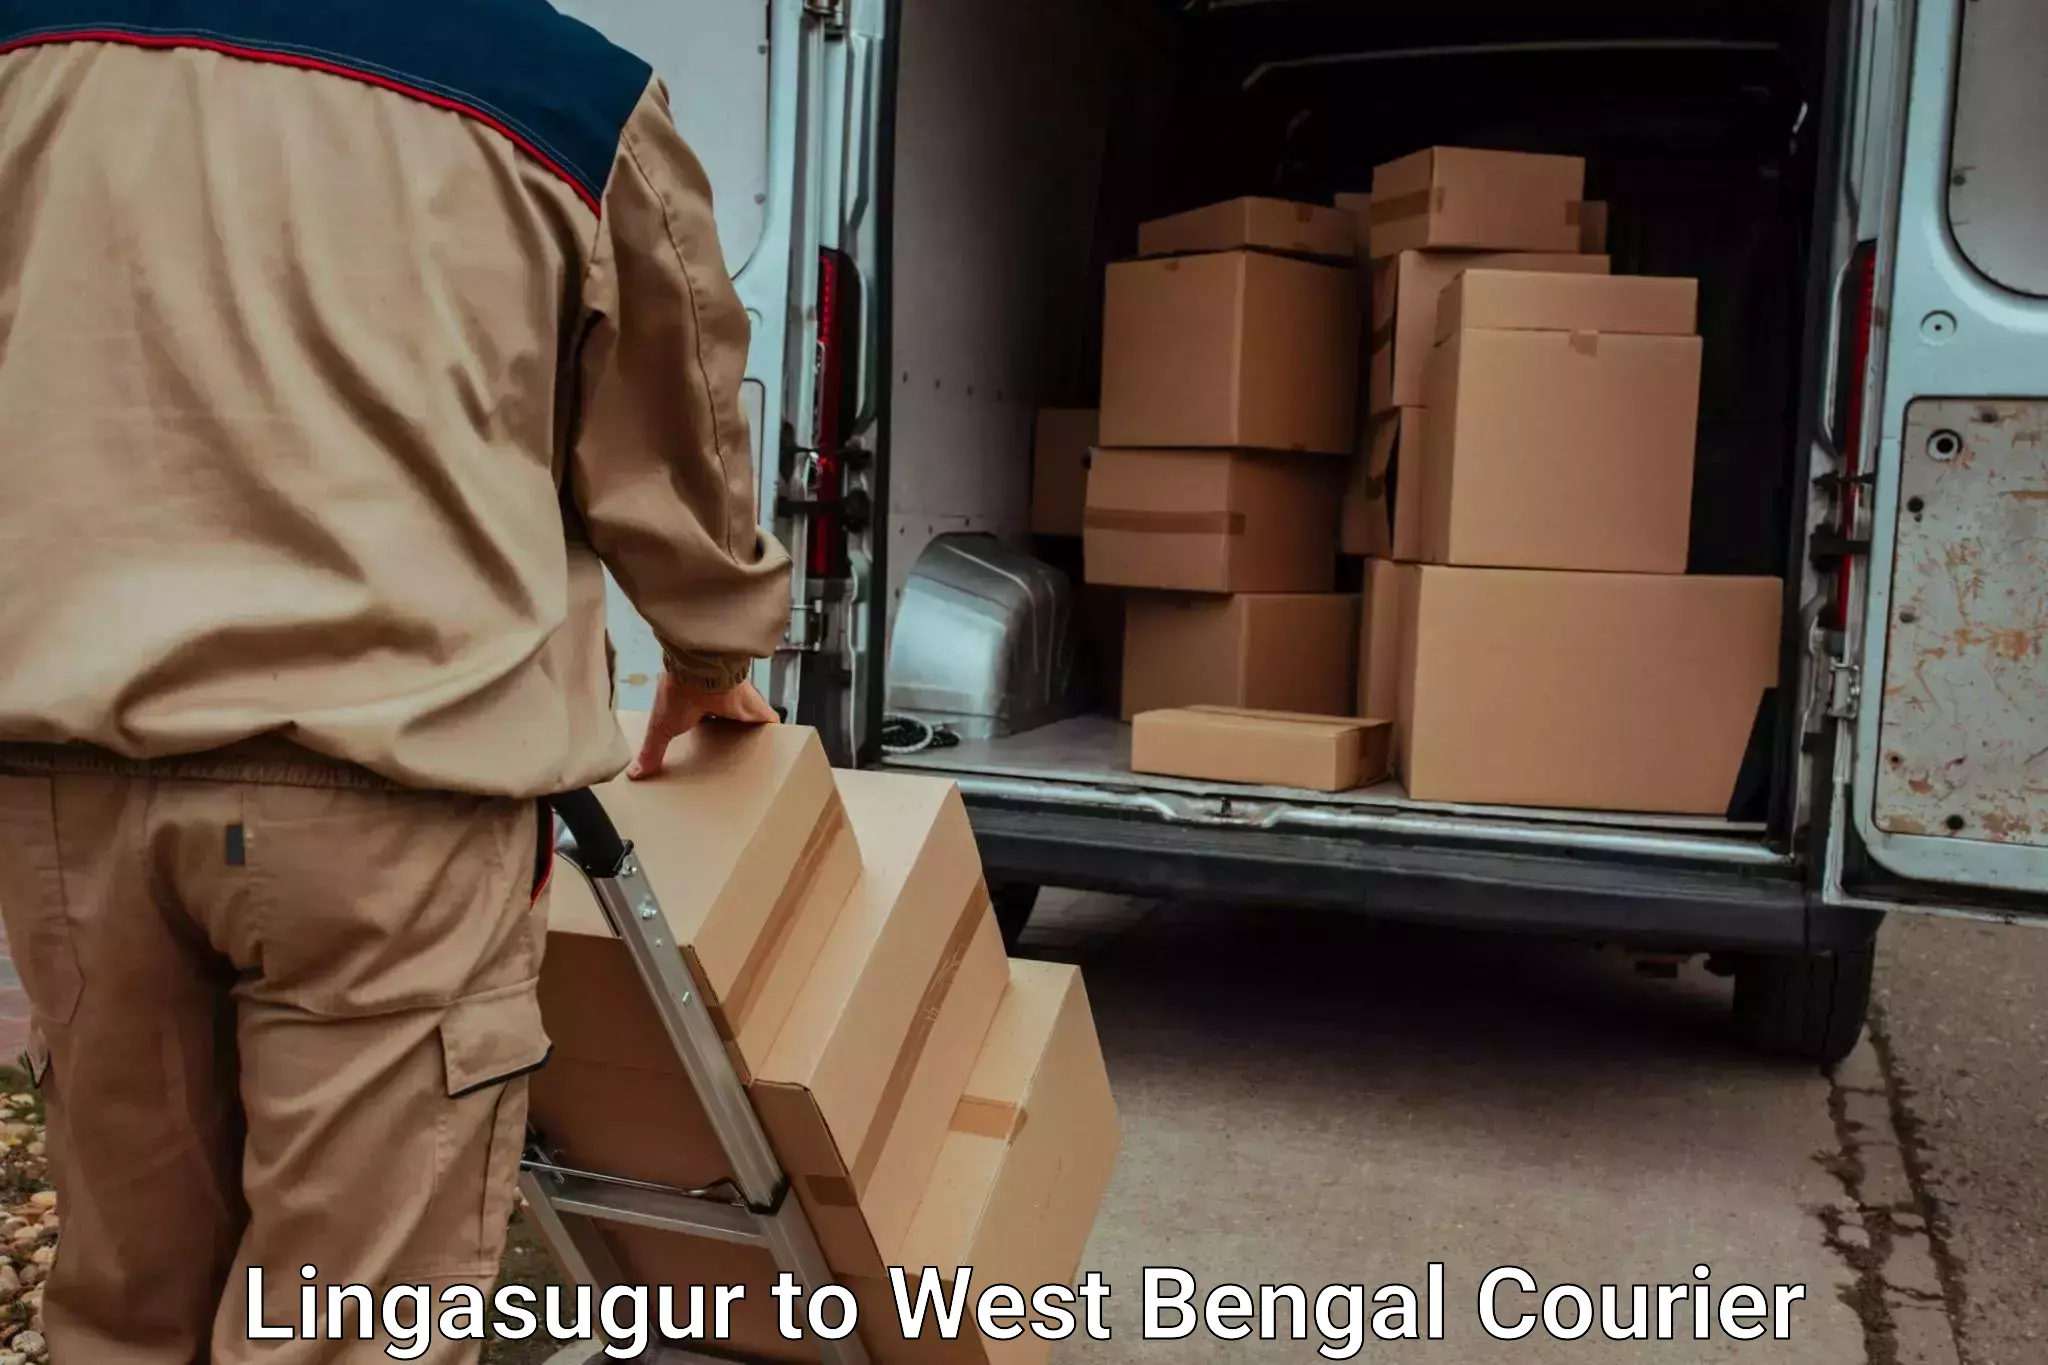 Trusted relocation experts Lingasugur to West Bengal